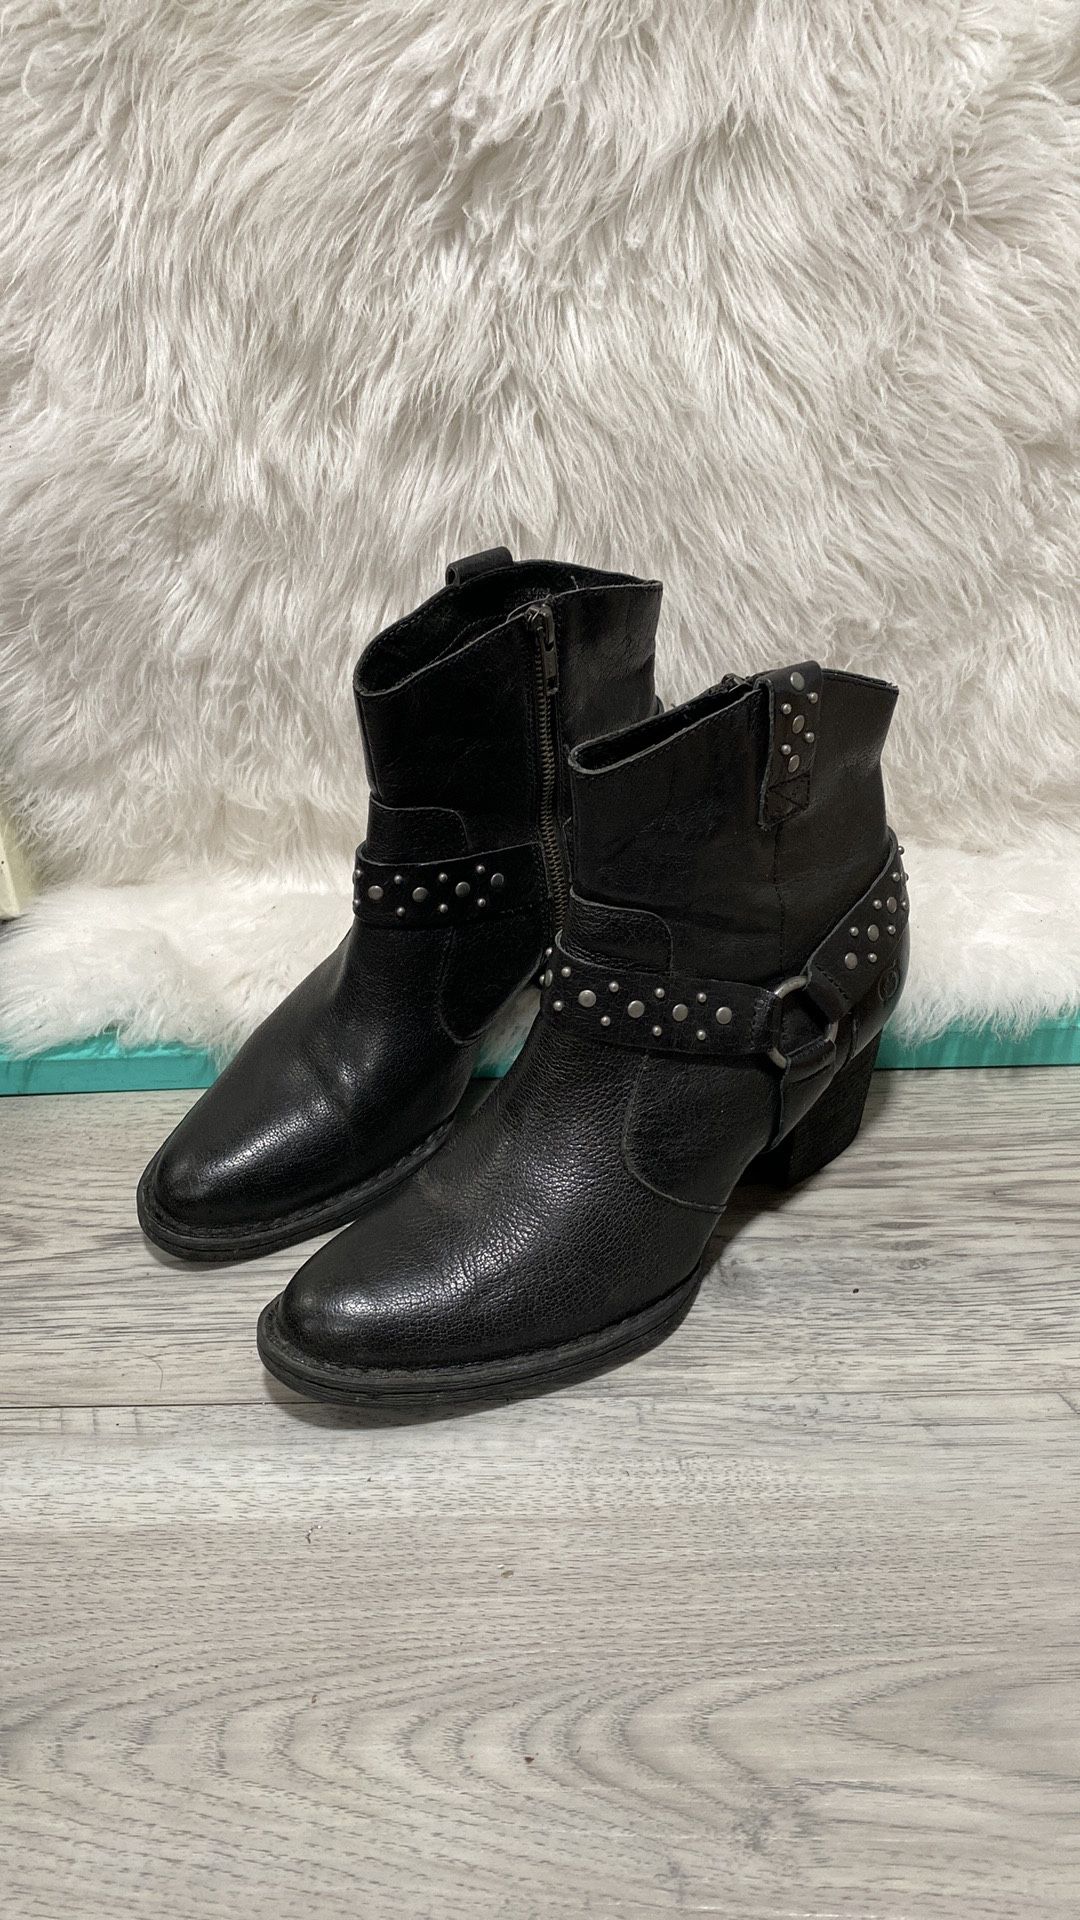 Born Black Studded Leather Motorcycle Booties size 9.5 